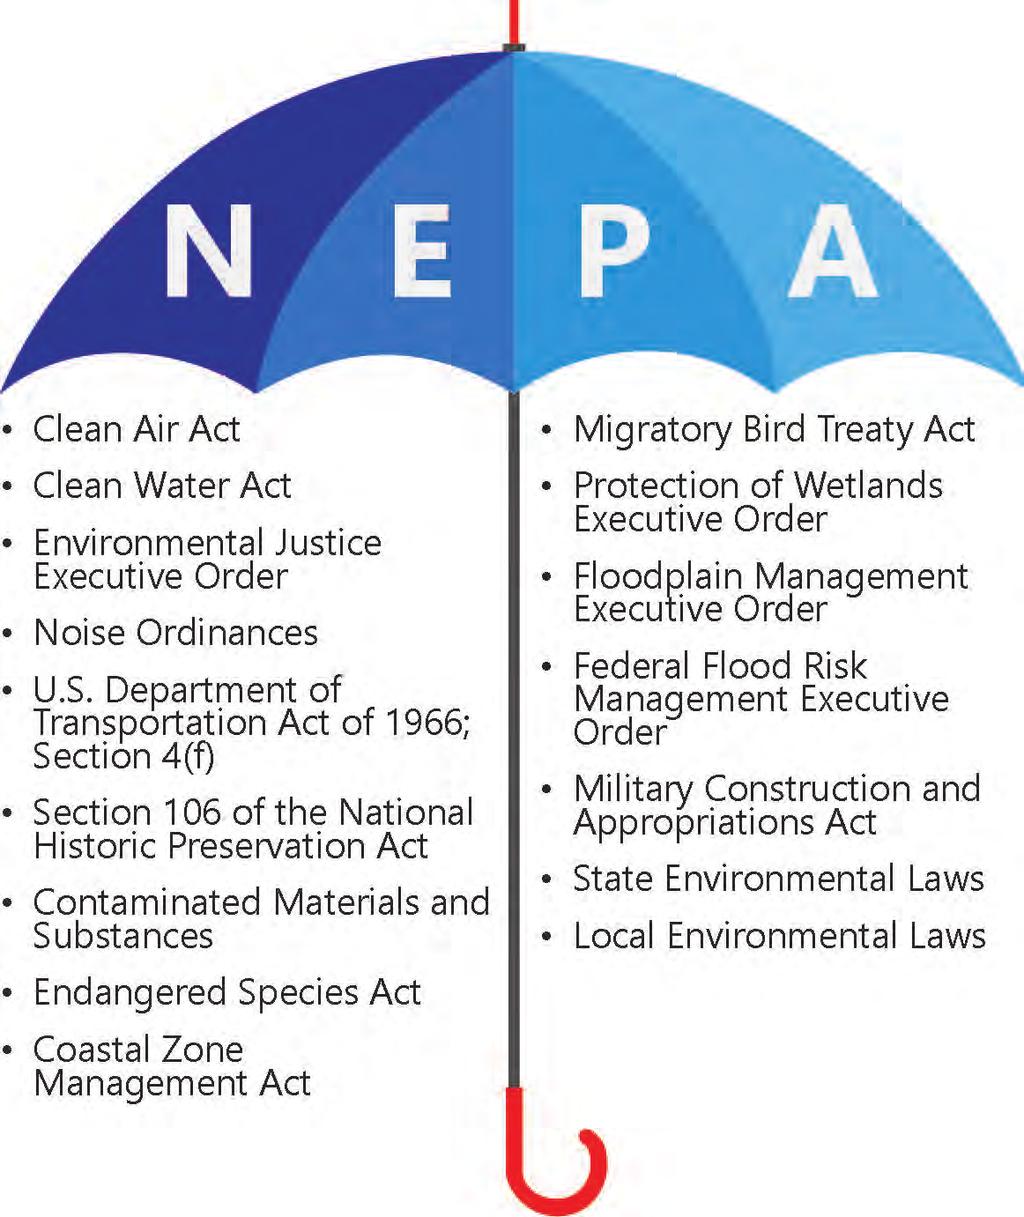 Project Overview What is NEPA? The National Environmental Policy Act of 1969 (NEPA) requires Federal agencies to assess the environmental effects of their proposed actions prior to making decisions.